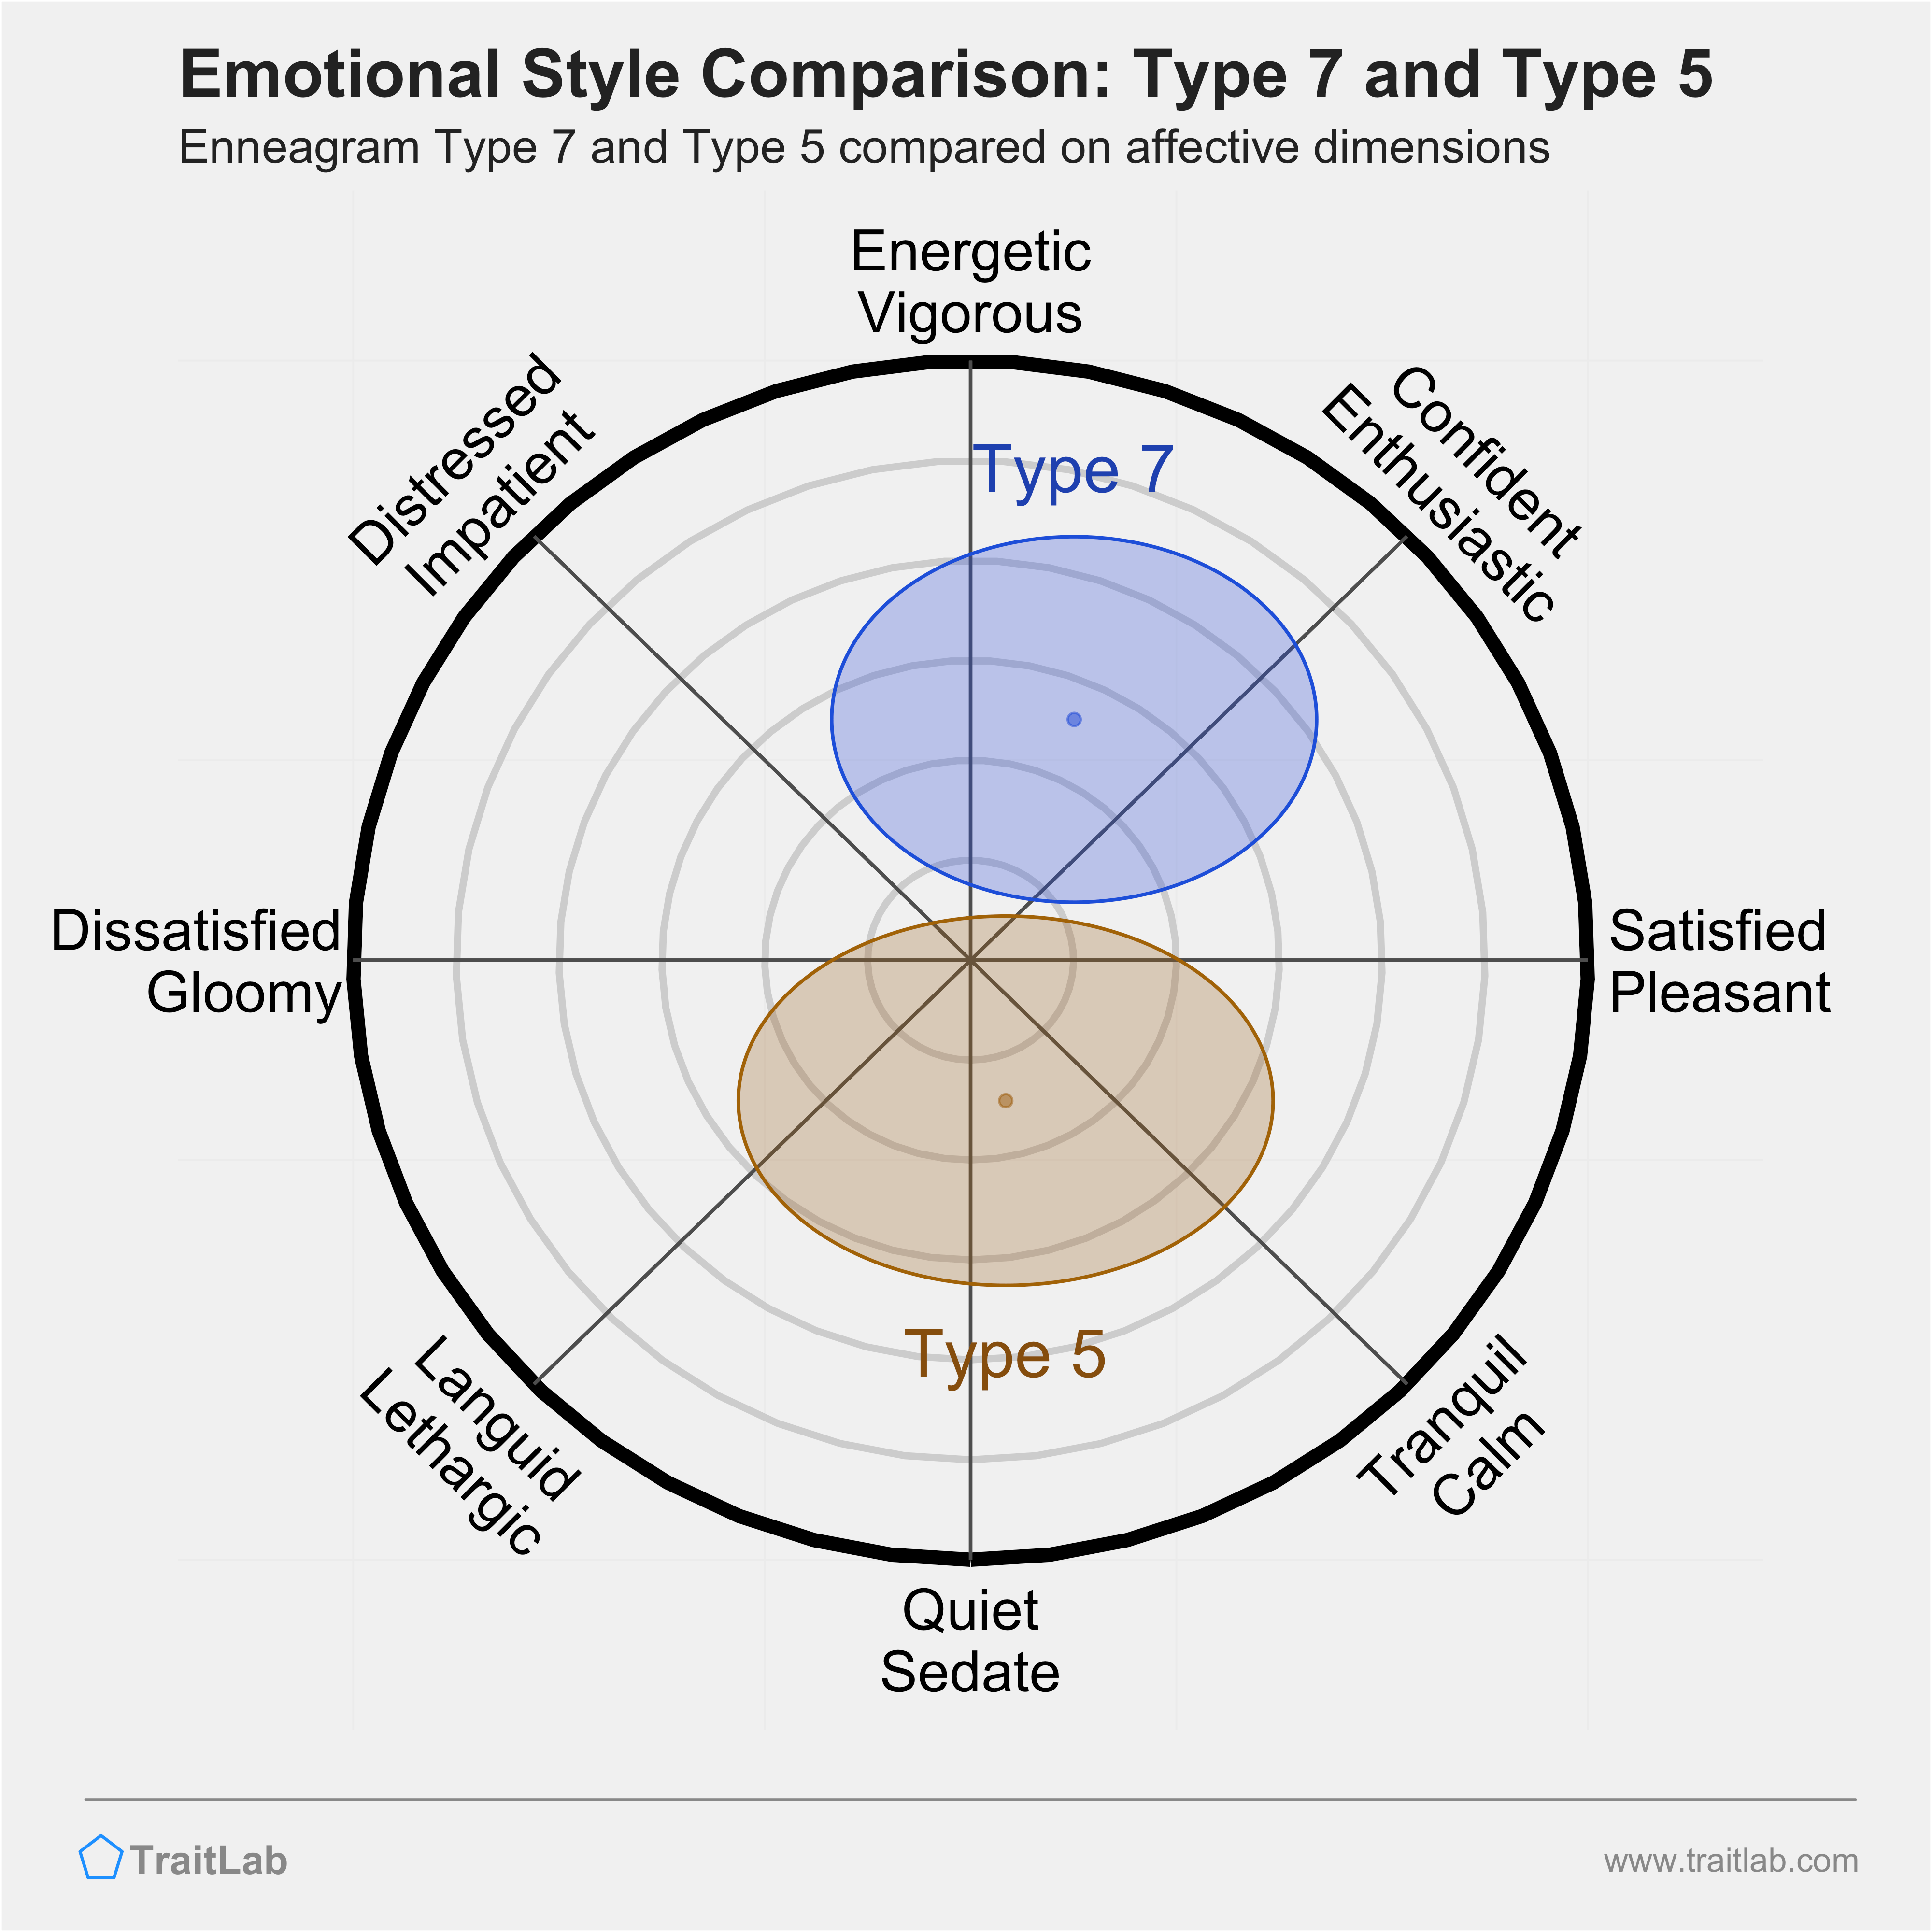 Type 7 and Type 5 comparison across emotional (affective) dimensions